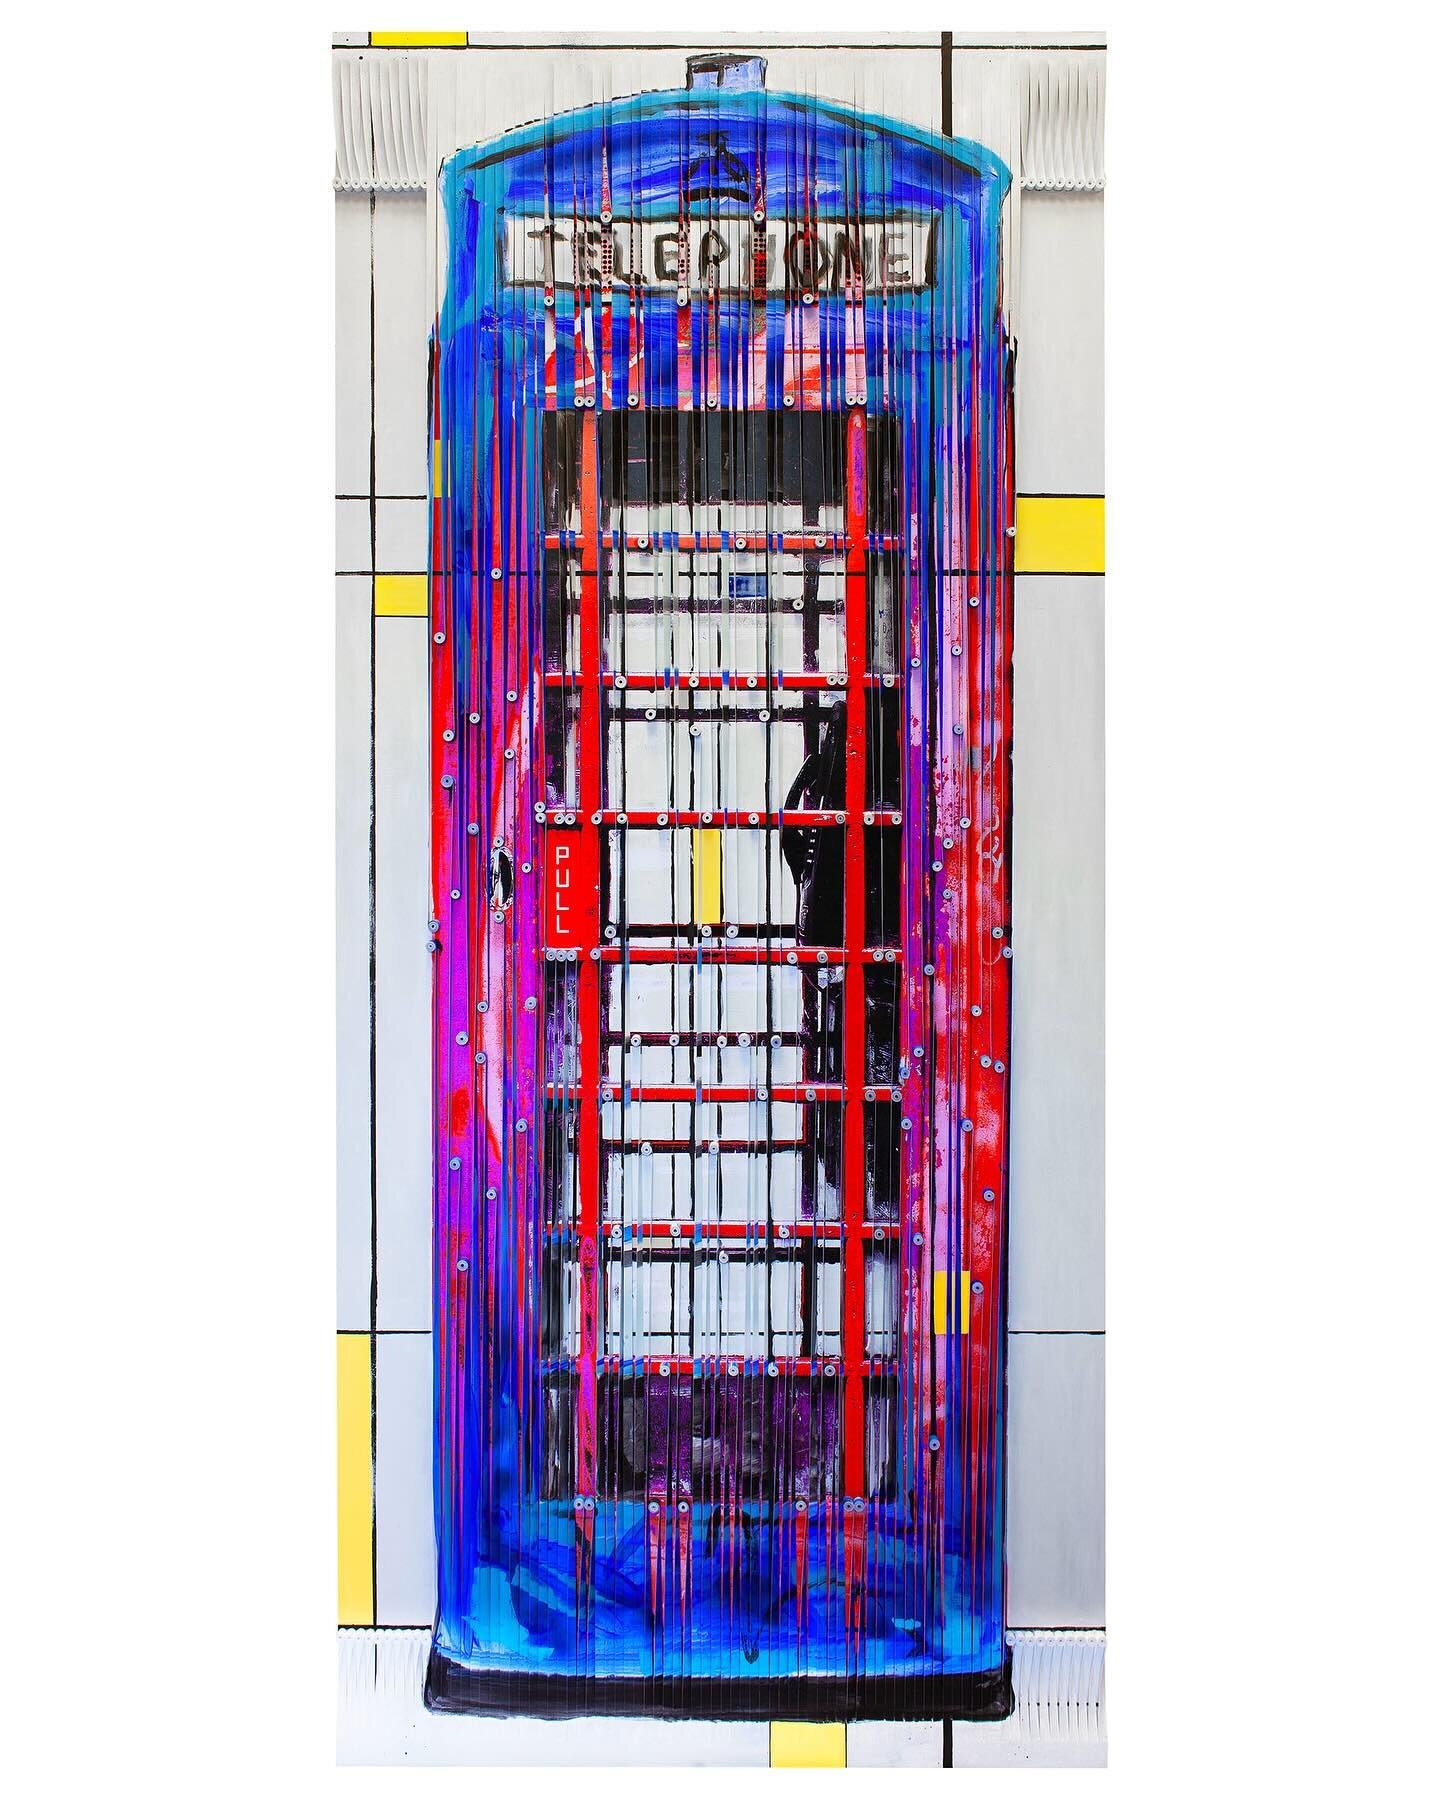 New #STBR - Mondrian Edition Red Blue Purple- 180cm x 80cm x 5cm - collaged paper and acrylic paint on board - 2023 - #unique ❤️💙💜 &hellip;&hellip;please contact @aircontemporarygallery for further details 
.
.
.
#urban #art #london #phonebox #uk #